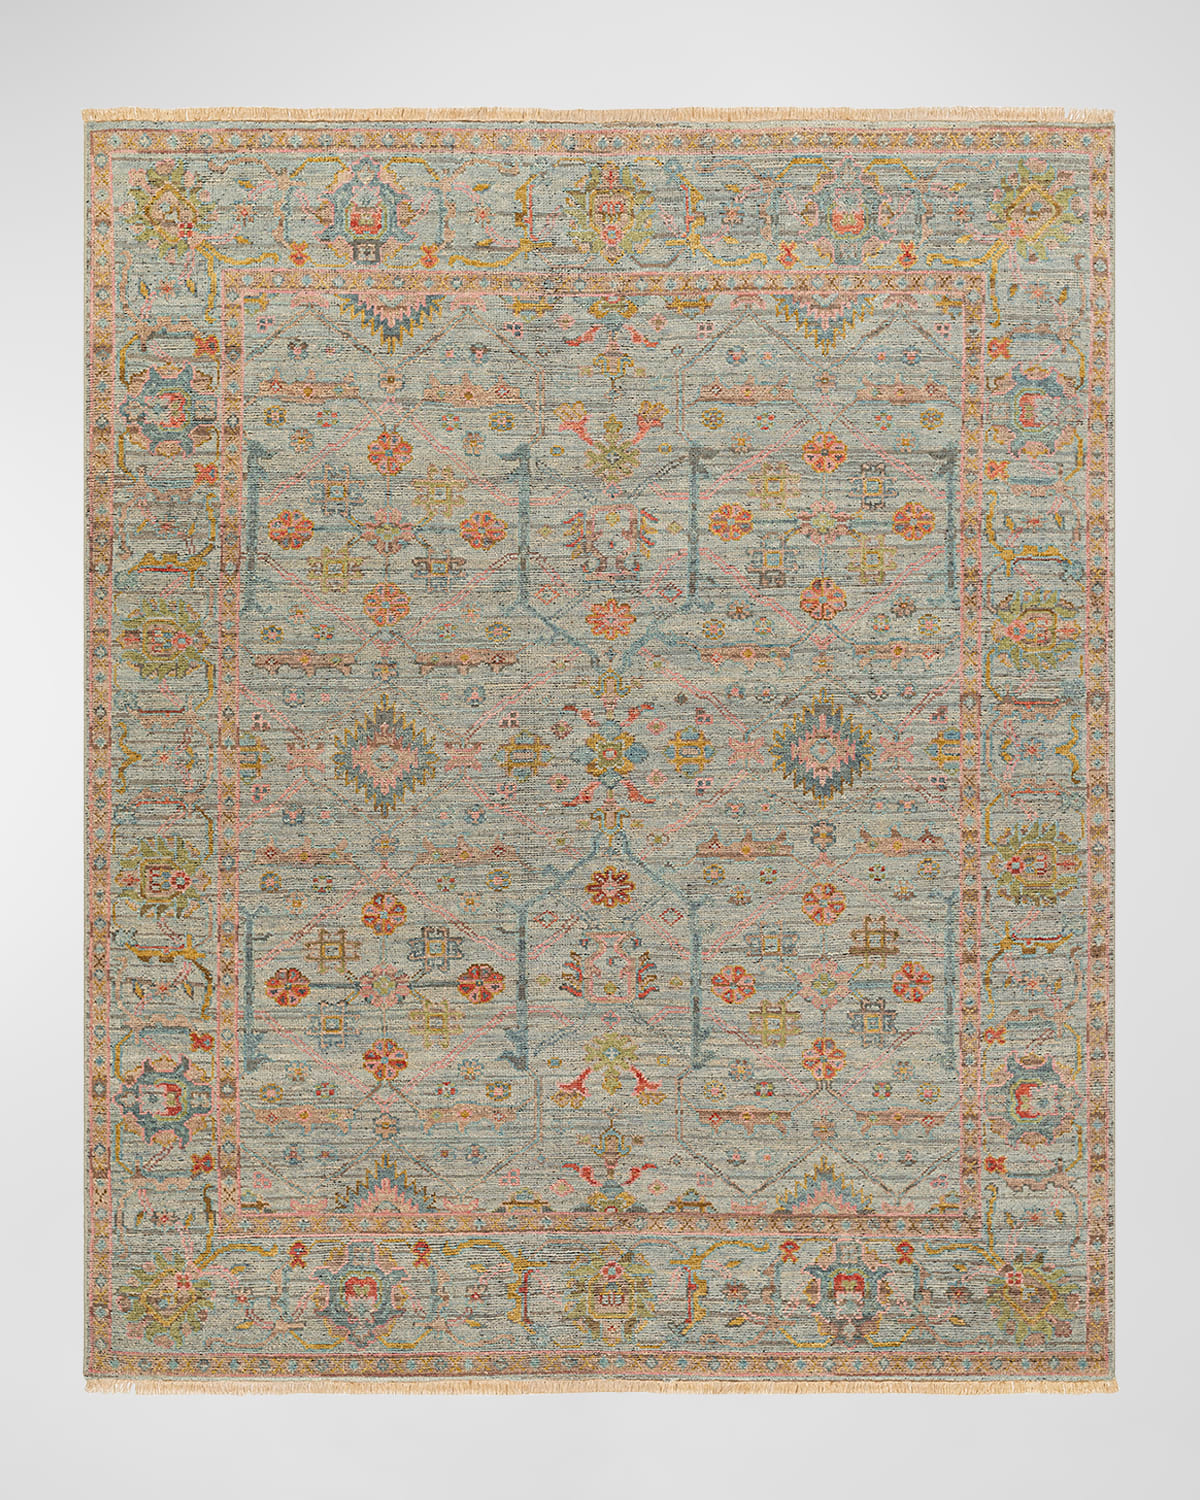 Brindle Hand-Knotted Rug, 6' x 9'